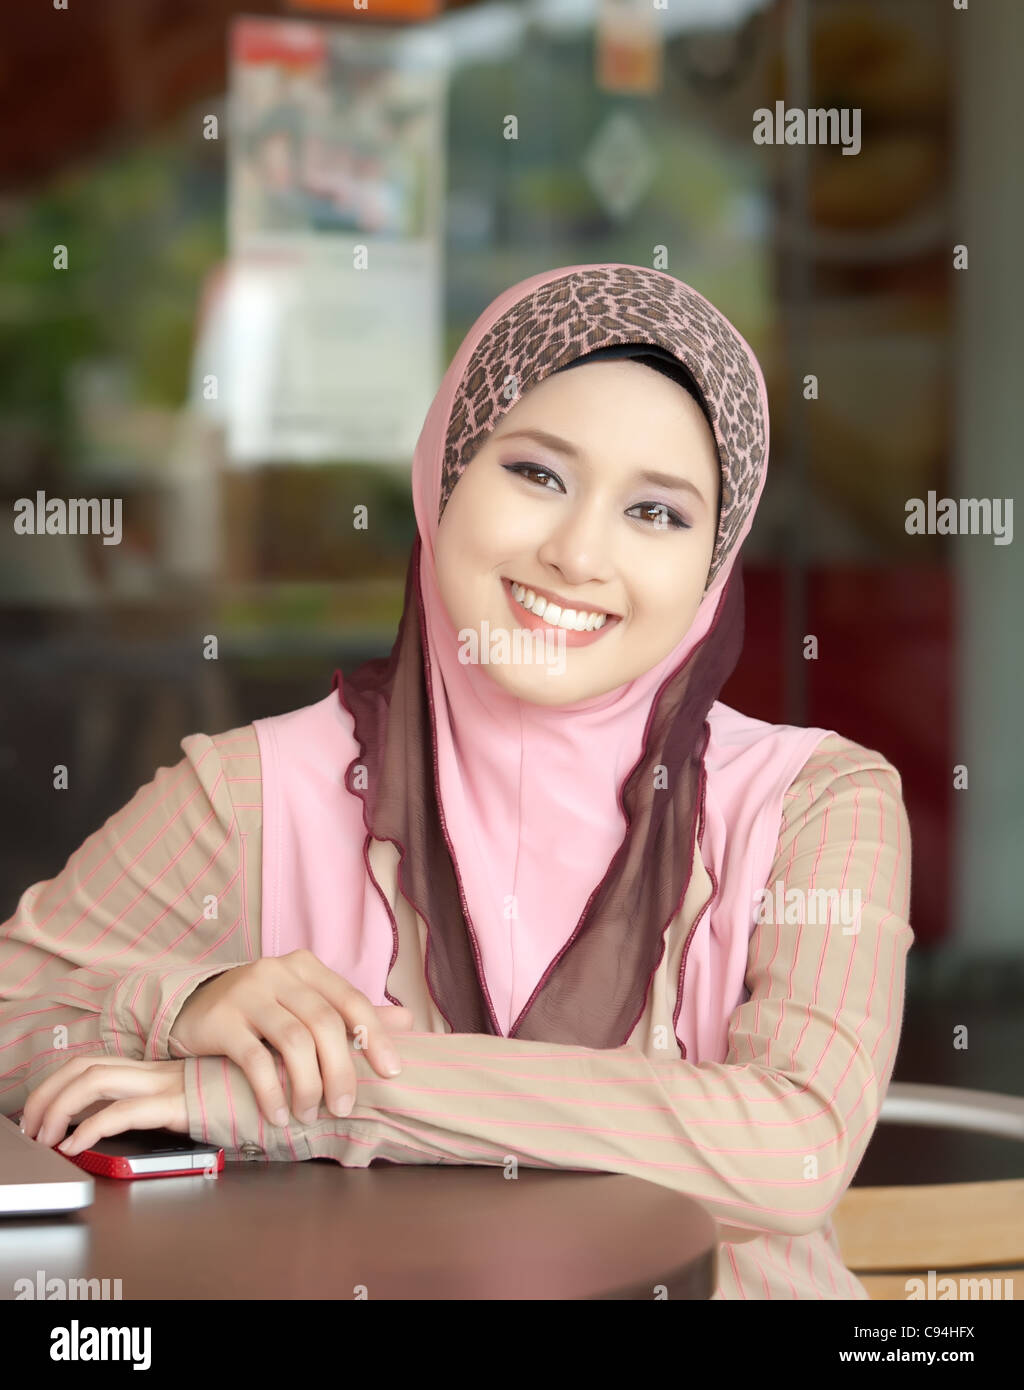 Muslim young girl with beautiful smile Stock Photo